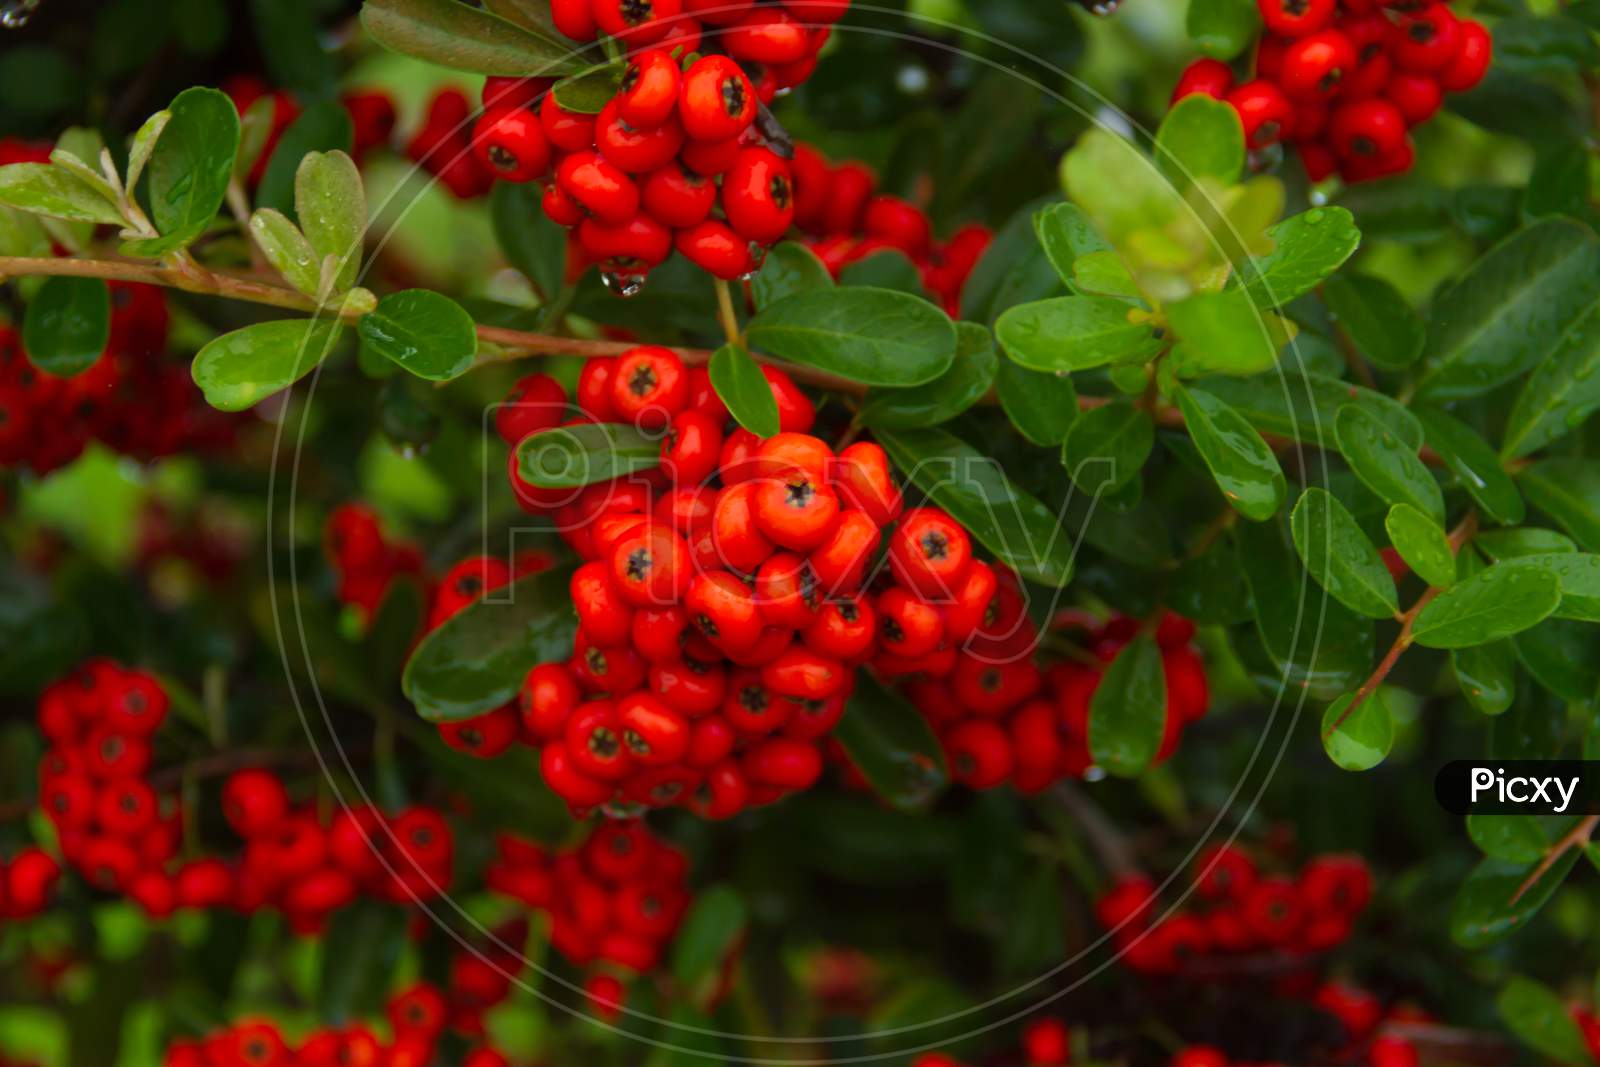 Ornamental Shrub Of Red Berries In Autumn With Raindrops